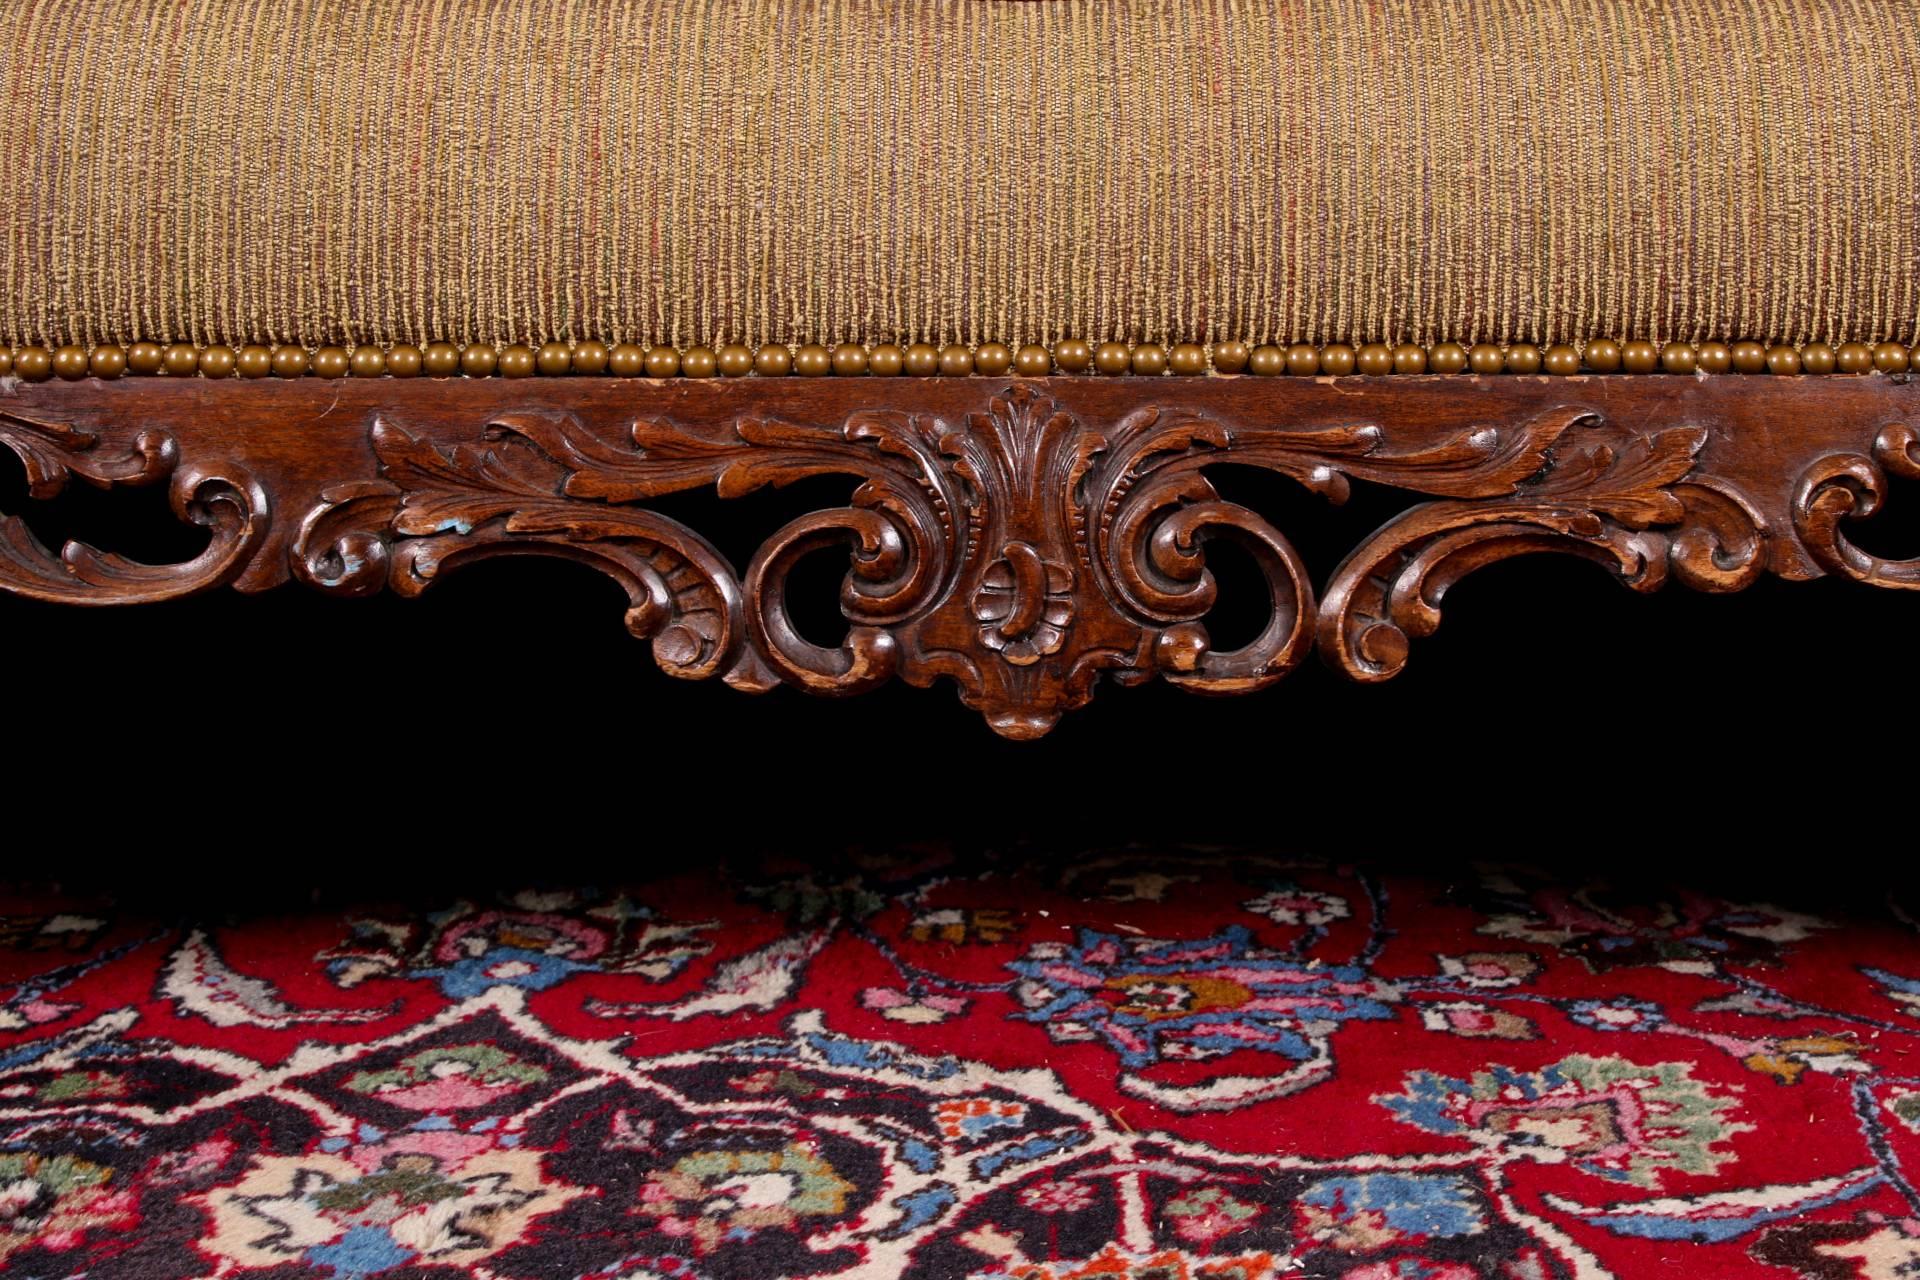 Carved wood frame with shell and scroll motifs, with a serpentine camel back upholstered in a textured tan and rust finely striped fabric and tan leather sides, back and cording. Nail heads on the sides and back. Raised on carved Spanish feet in